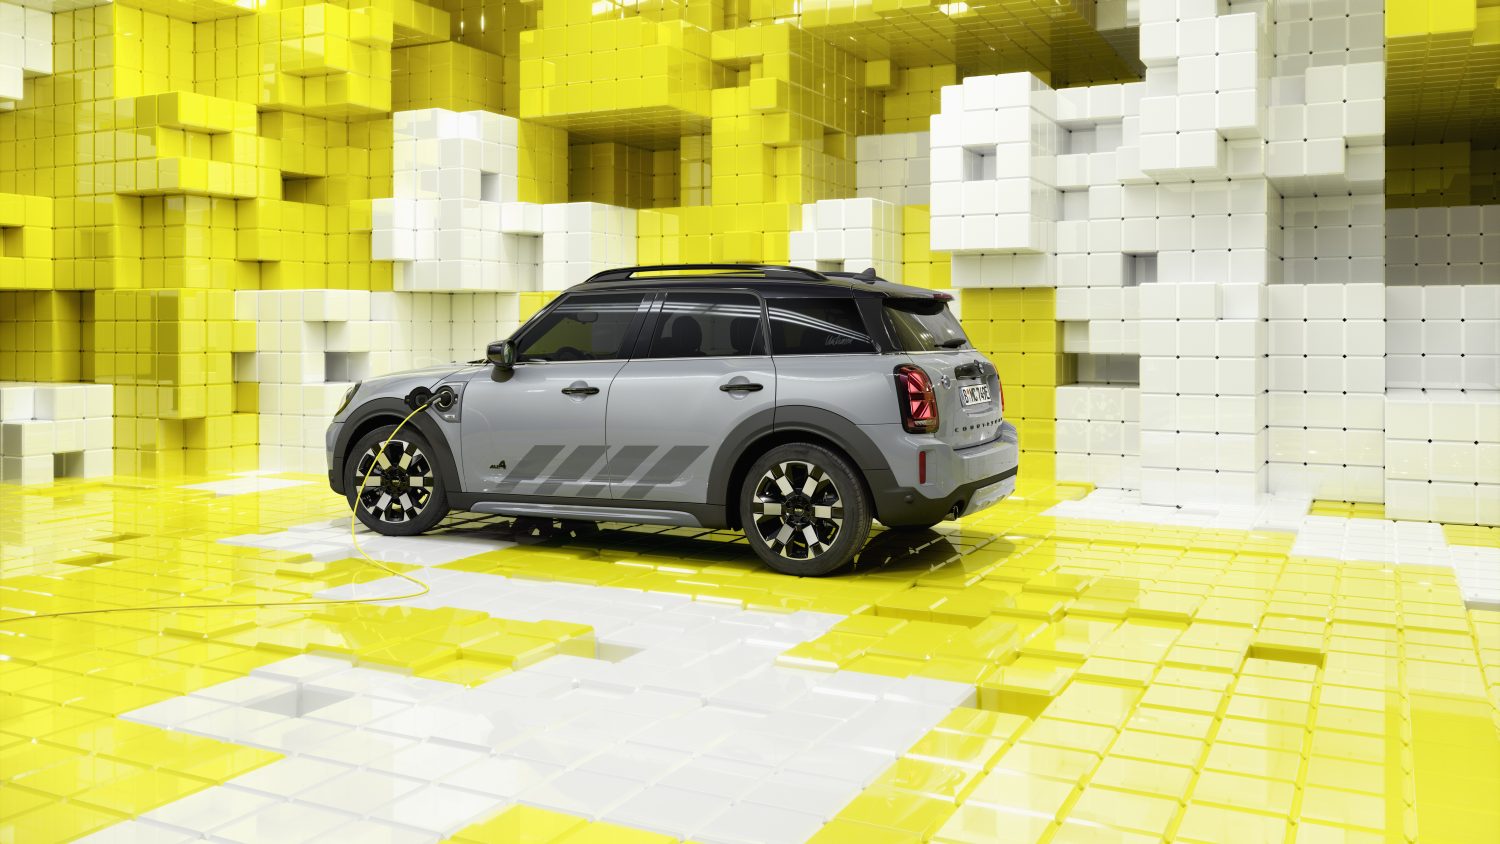 New MINI Countryman "Untamed Edition": Now available